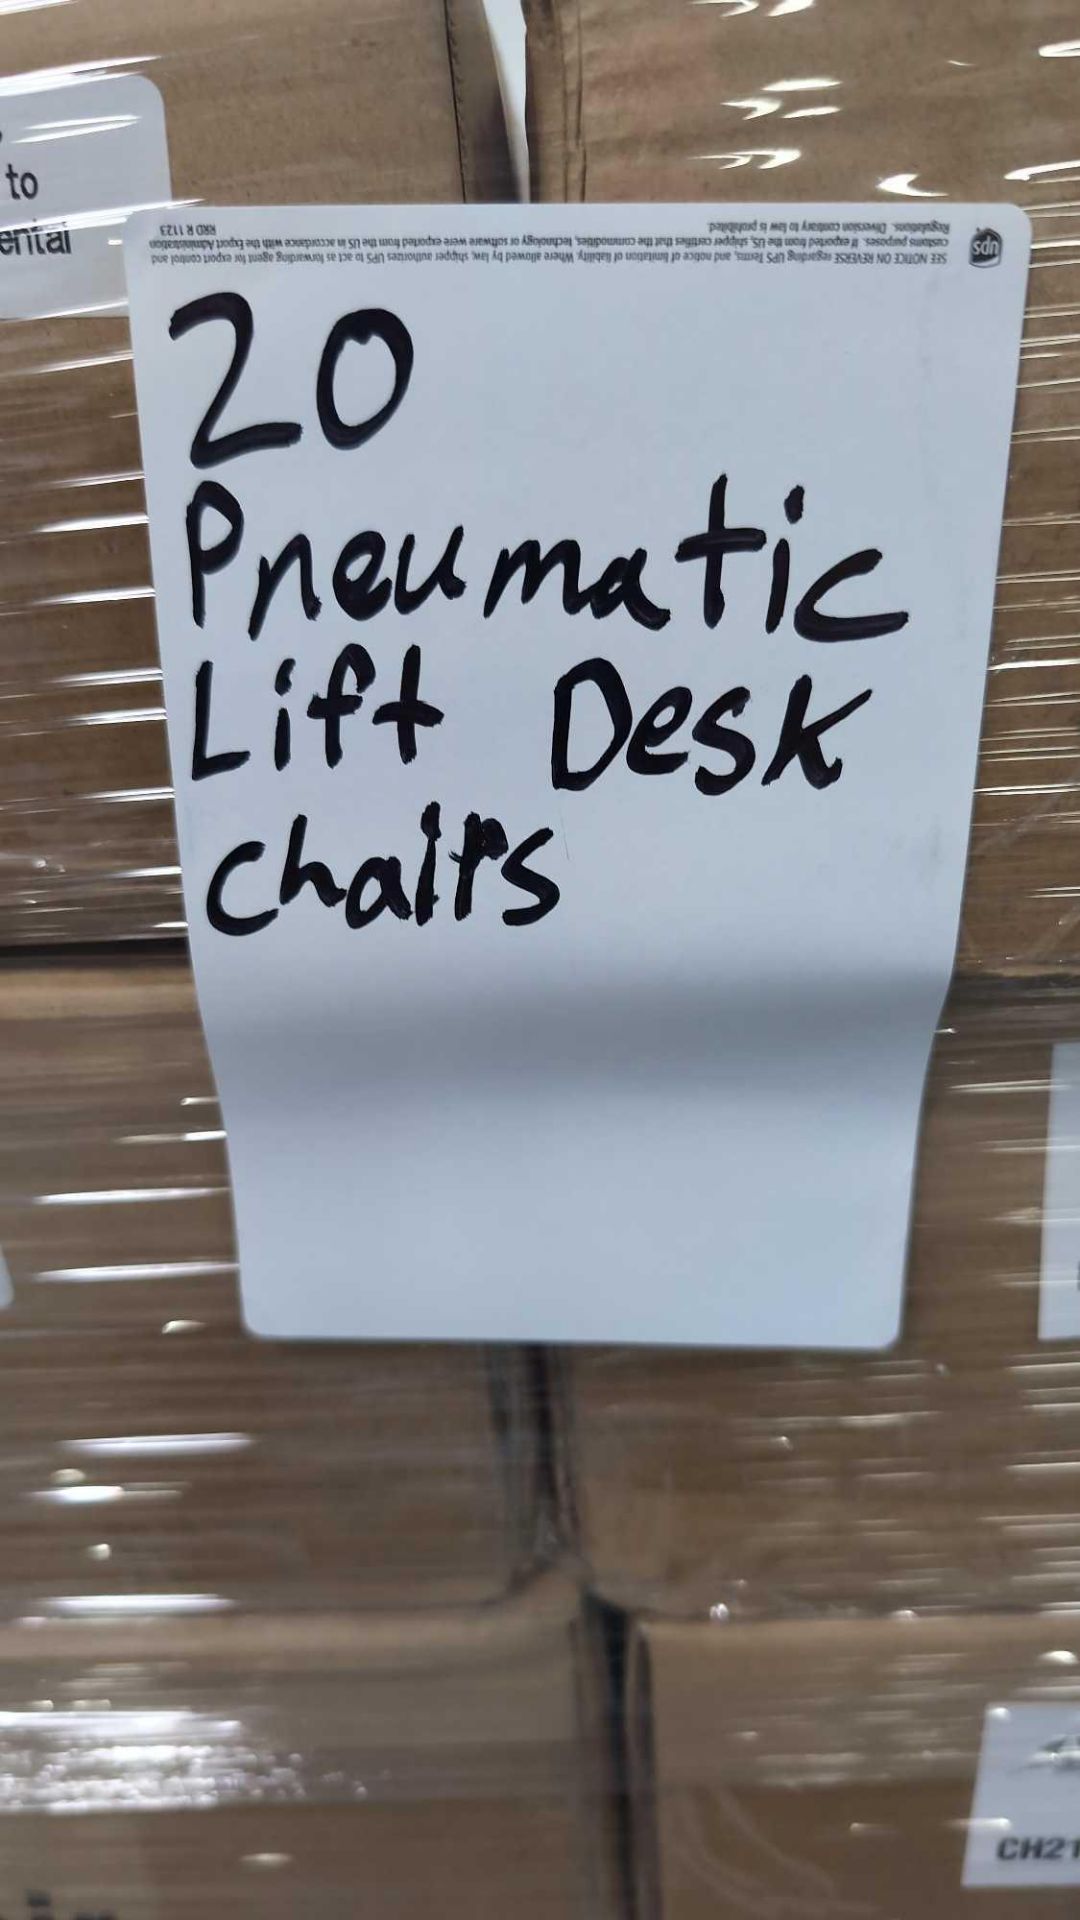 20 pneumatic lift chairs - Image 3 of 4